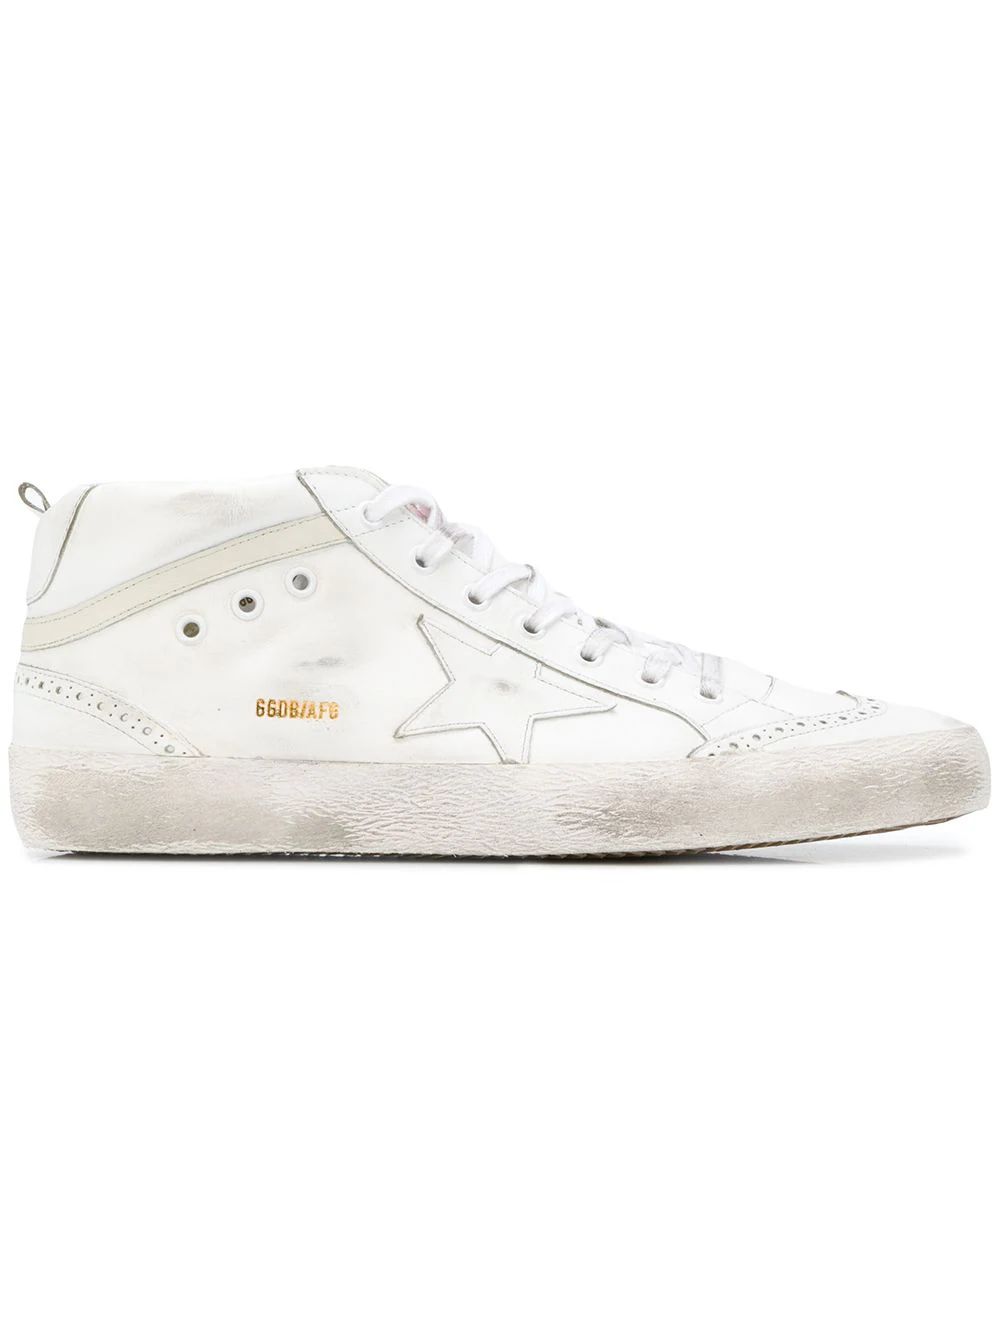 Golden Goose Deluxe Brand Mid Star sneakers - White | FarFetch Global